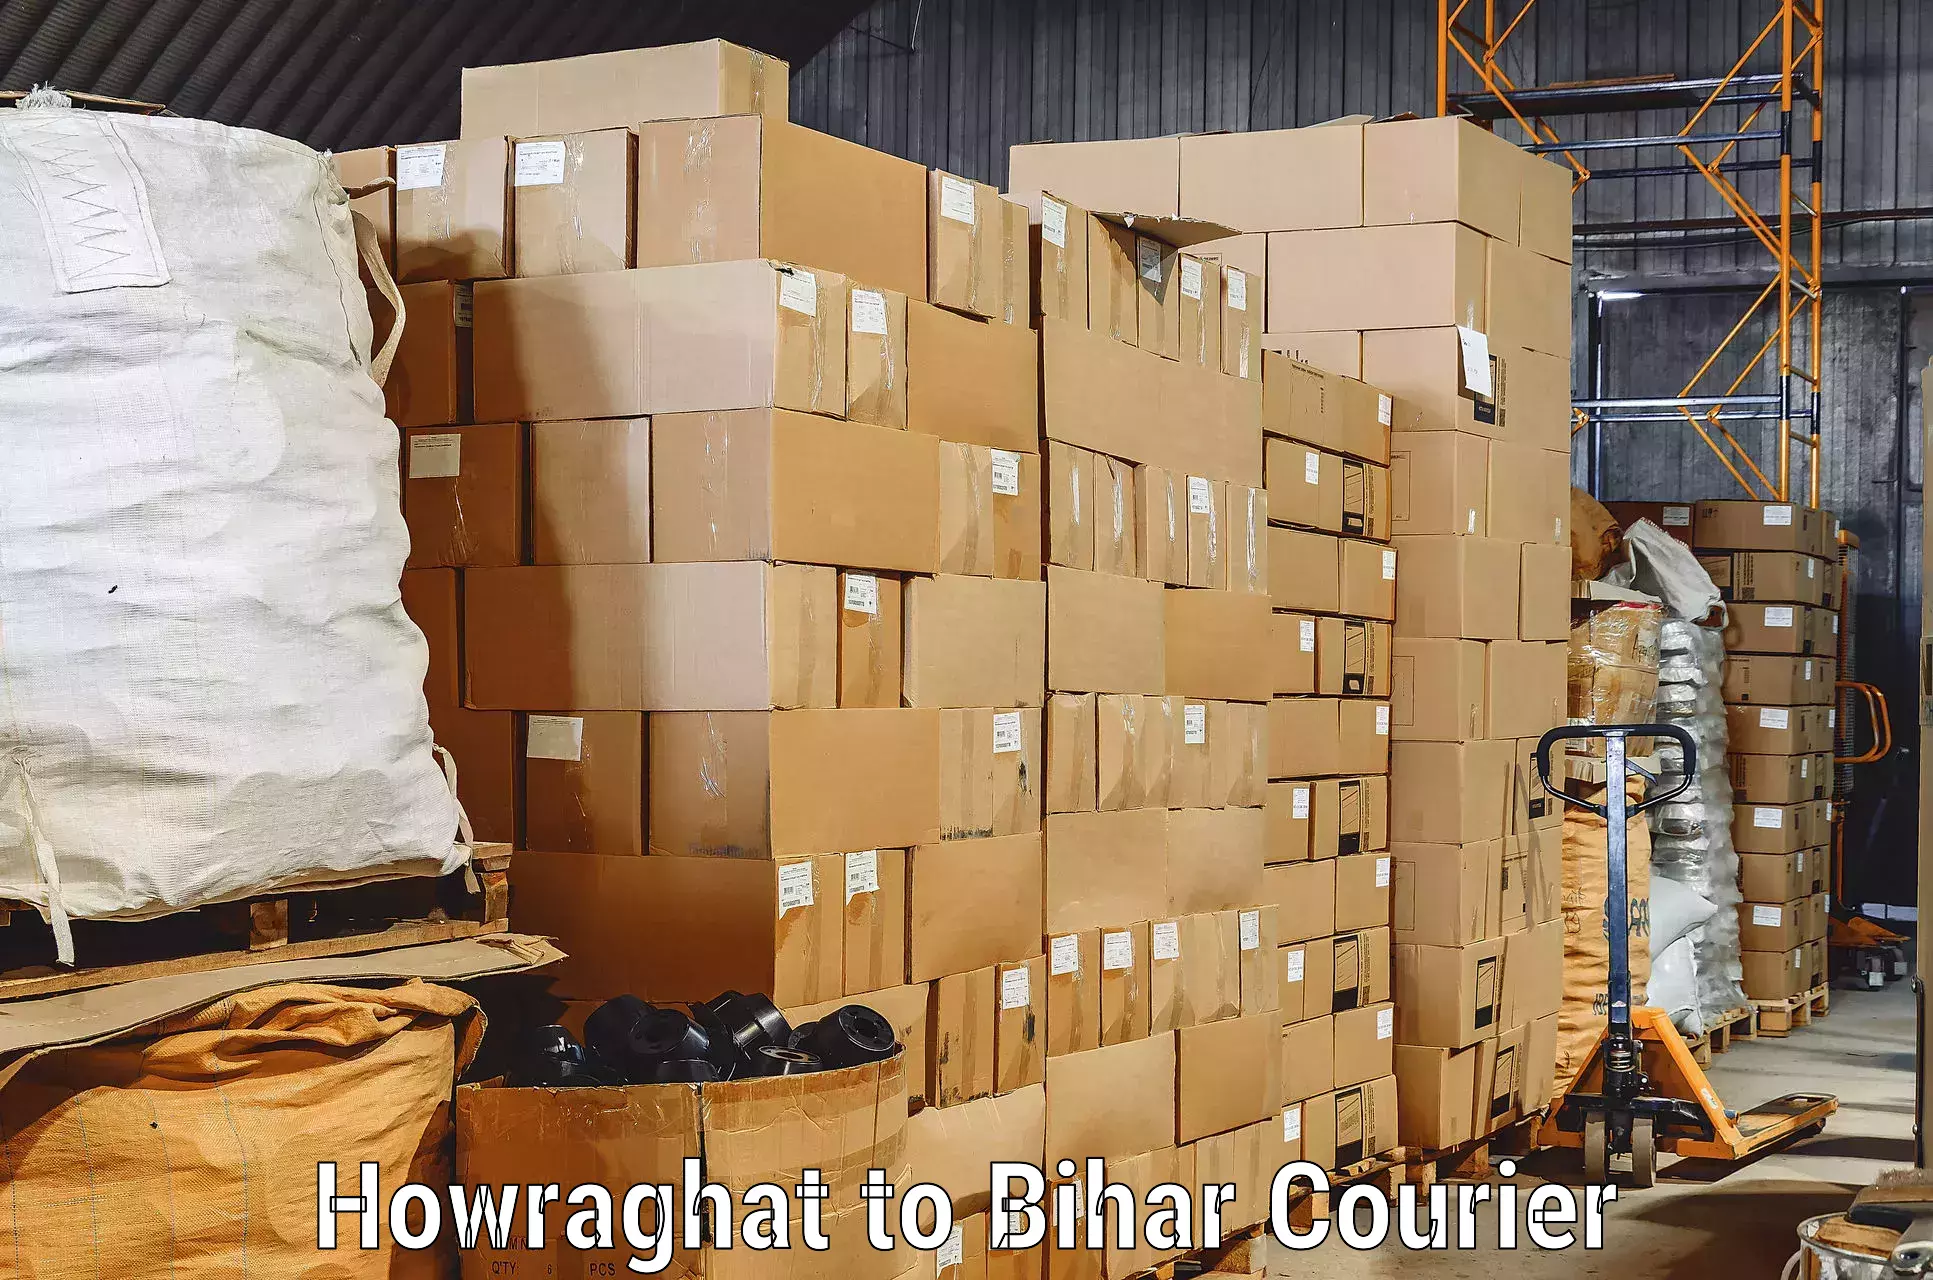 Furniture moving experts Howraghat to Bihar